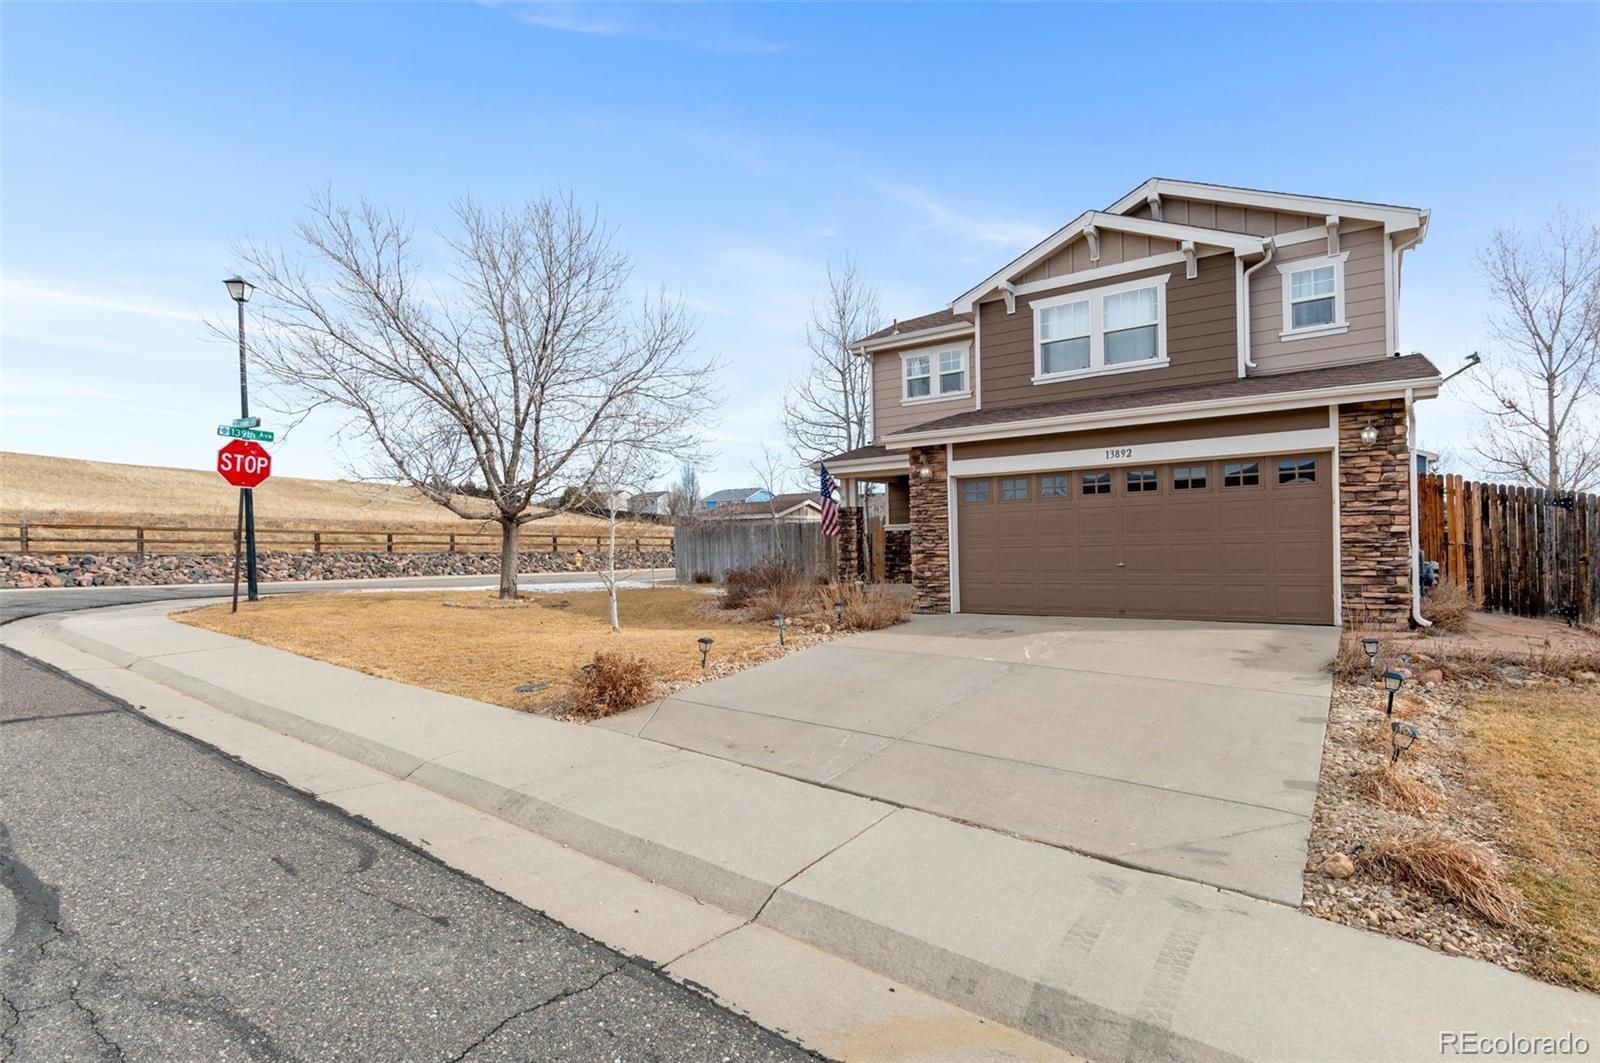 Report Image for 13892  Linden Court,Thornton, Colorado